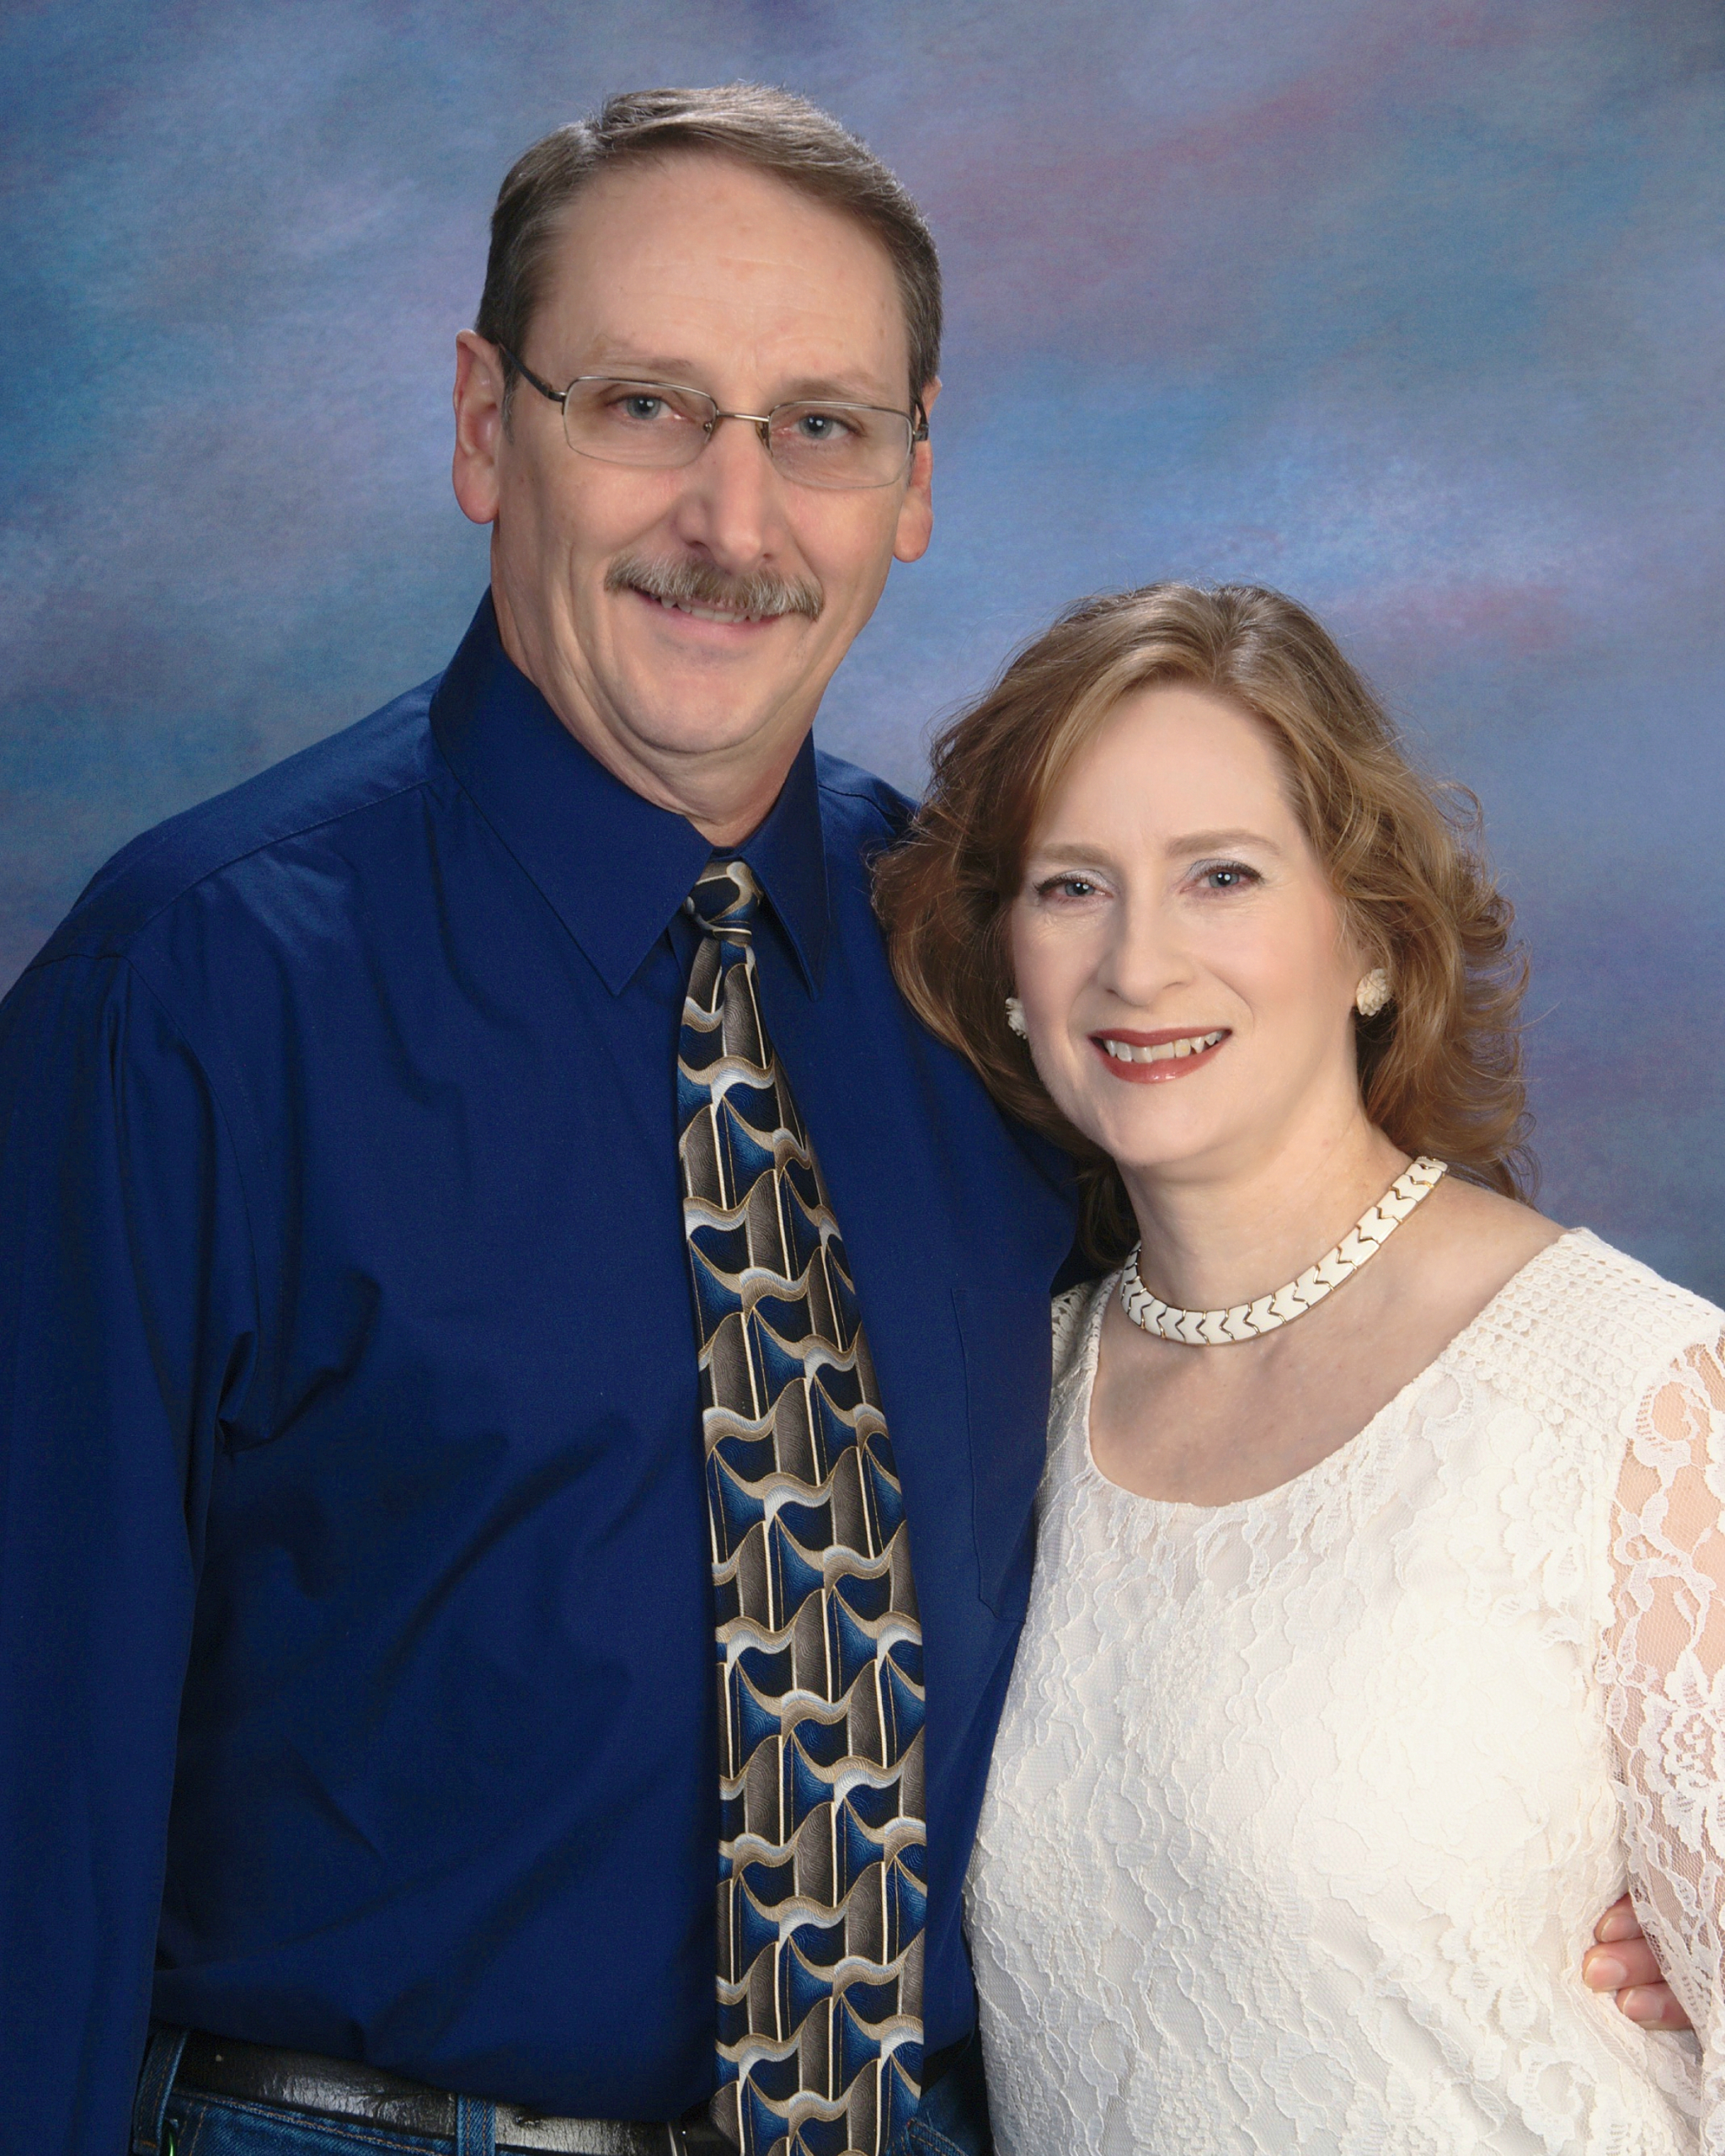 Rob and Beth Worthington – “a place of new beginnings”